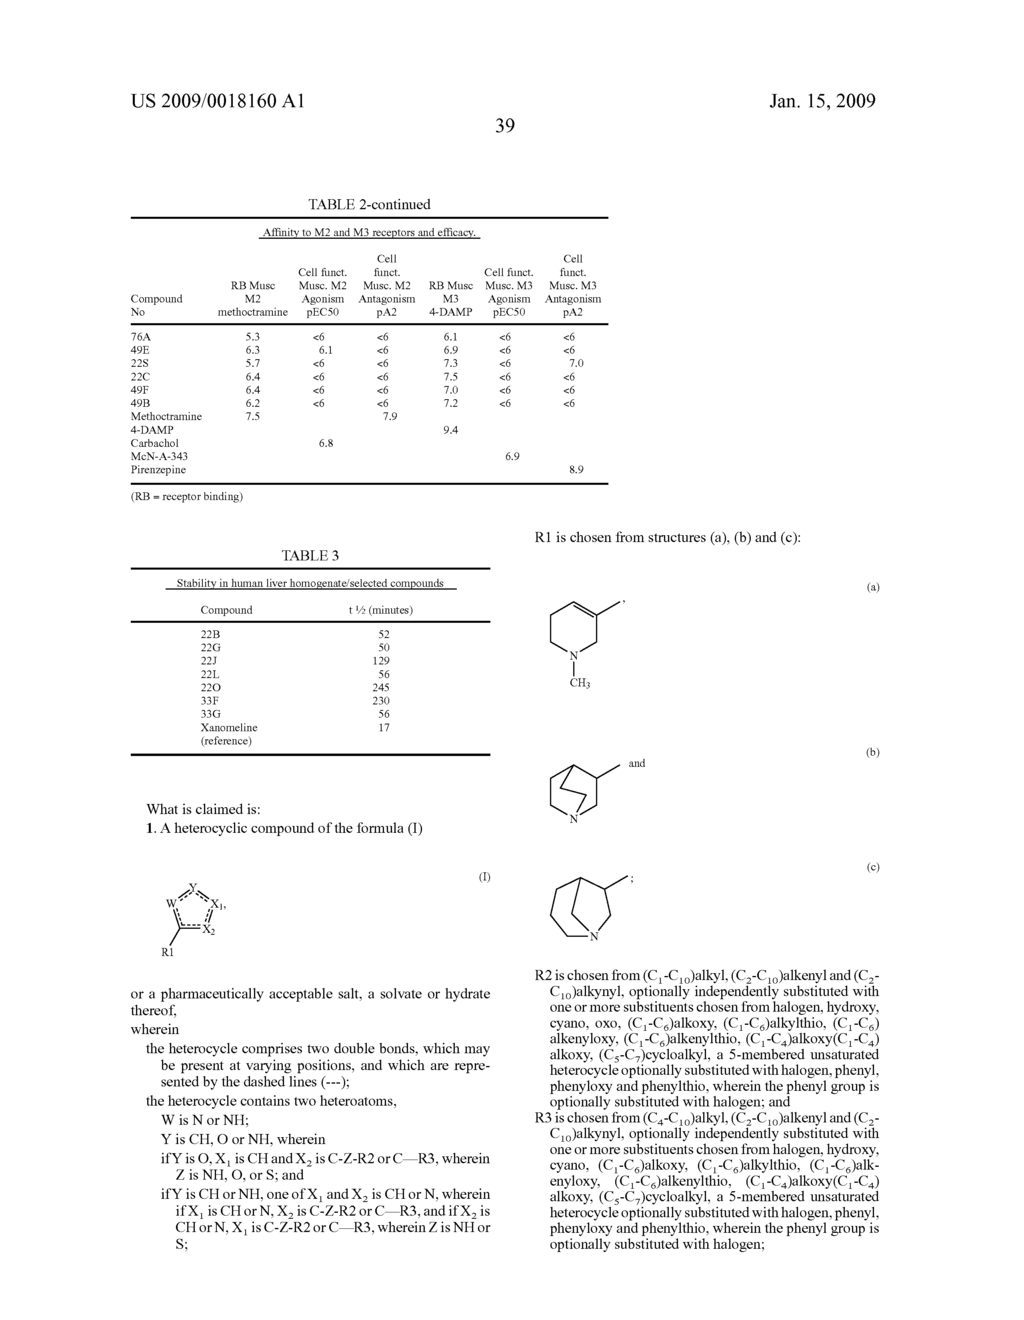 Heterocyclic Compounds with Affinity to Muscarinic Receptors - diagram, schematic, and image 40